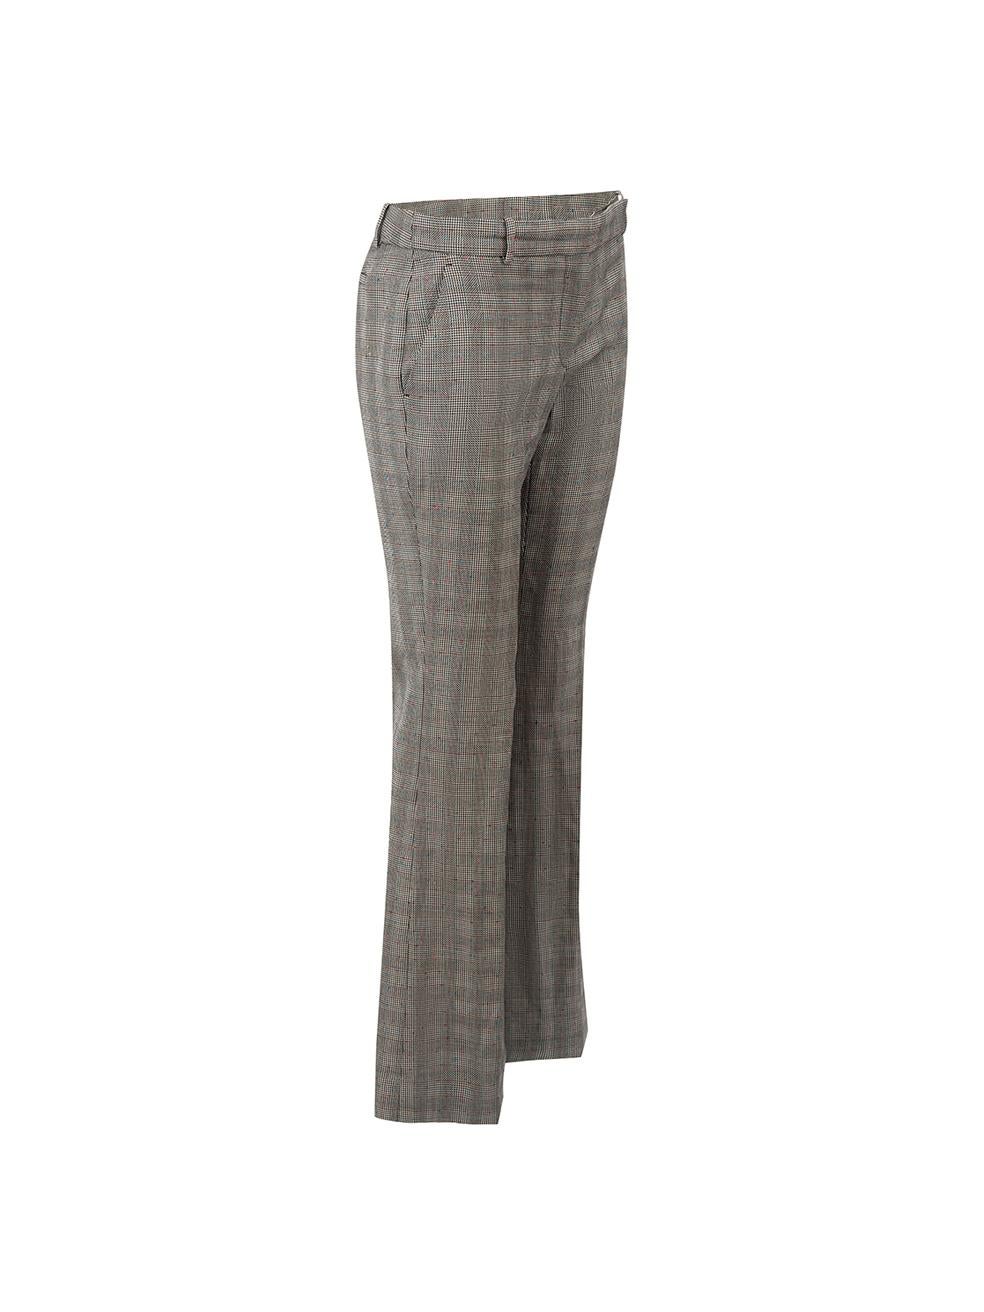 CONDITION is Very good. Hardly any visible wear to trousers is evident on this used Alexander McQueen designer resale item.



Details


Grey

Wool

Trousers

Checkered pattern

Flared

Fly zip and hook fastening

2x Side pockets

1x Back